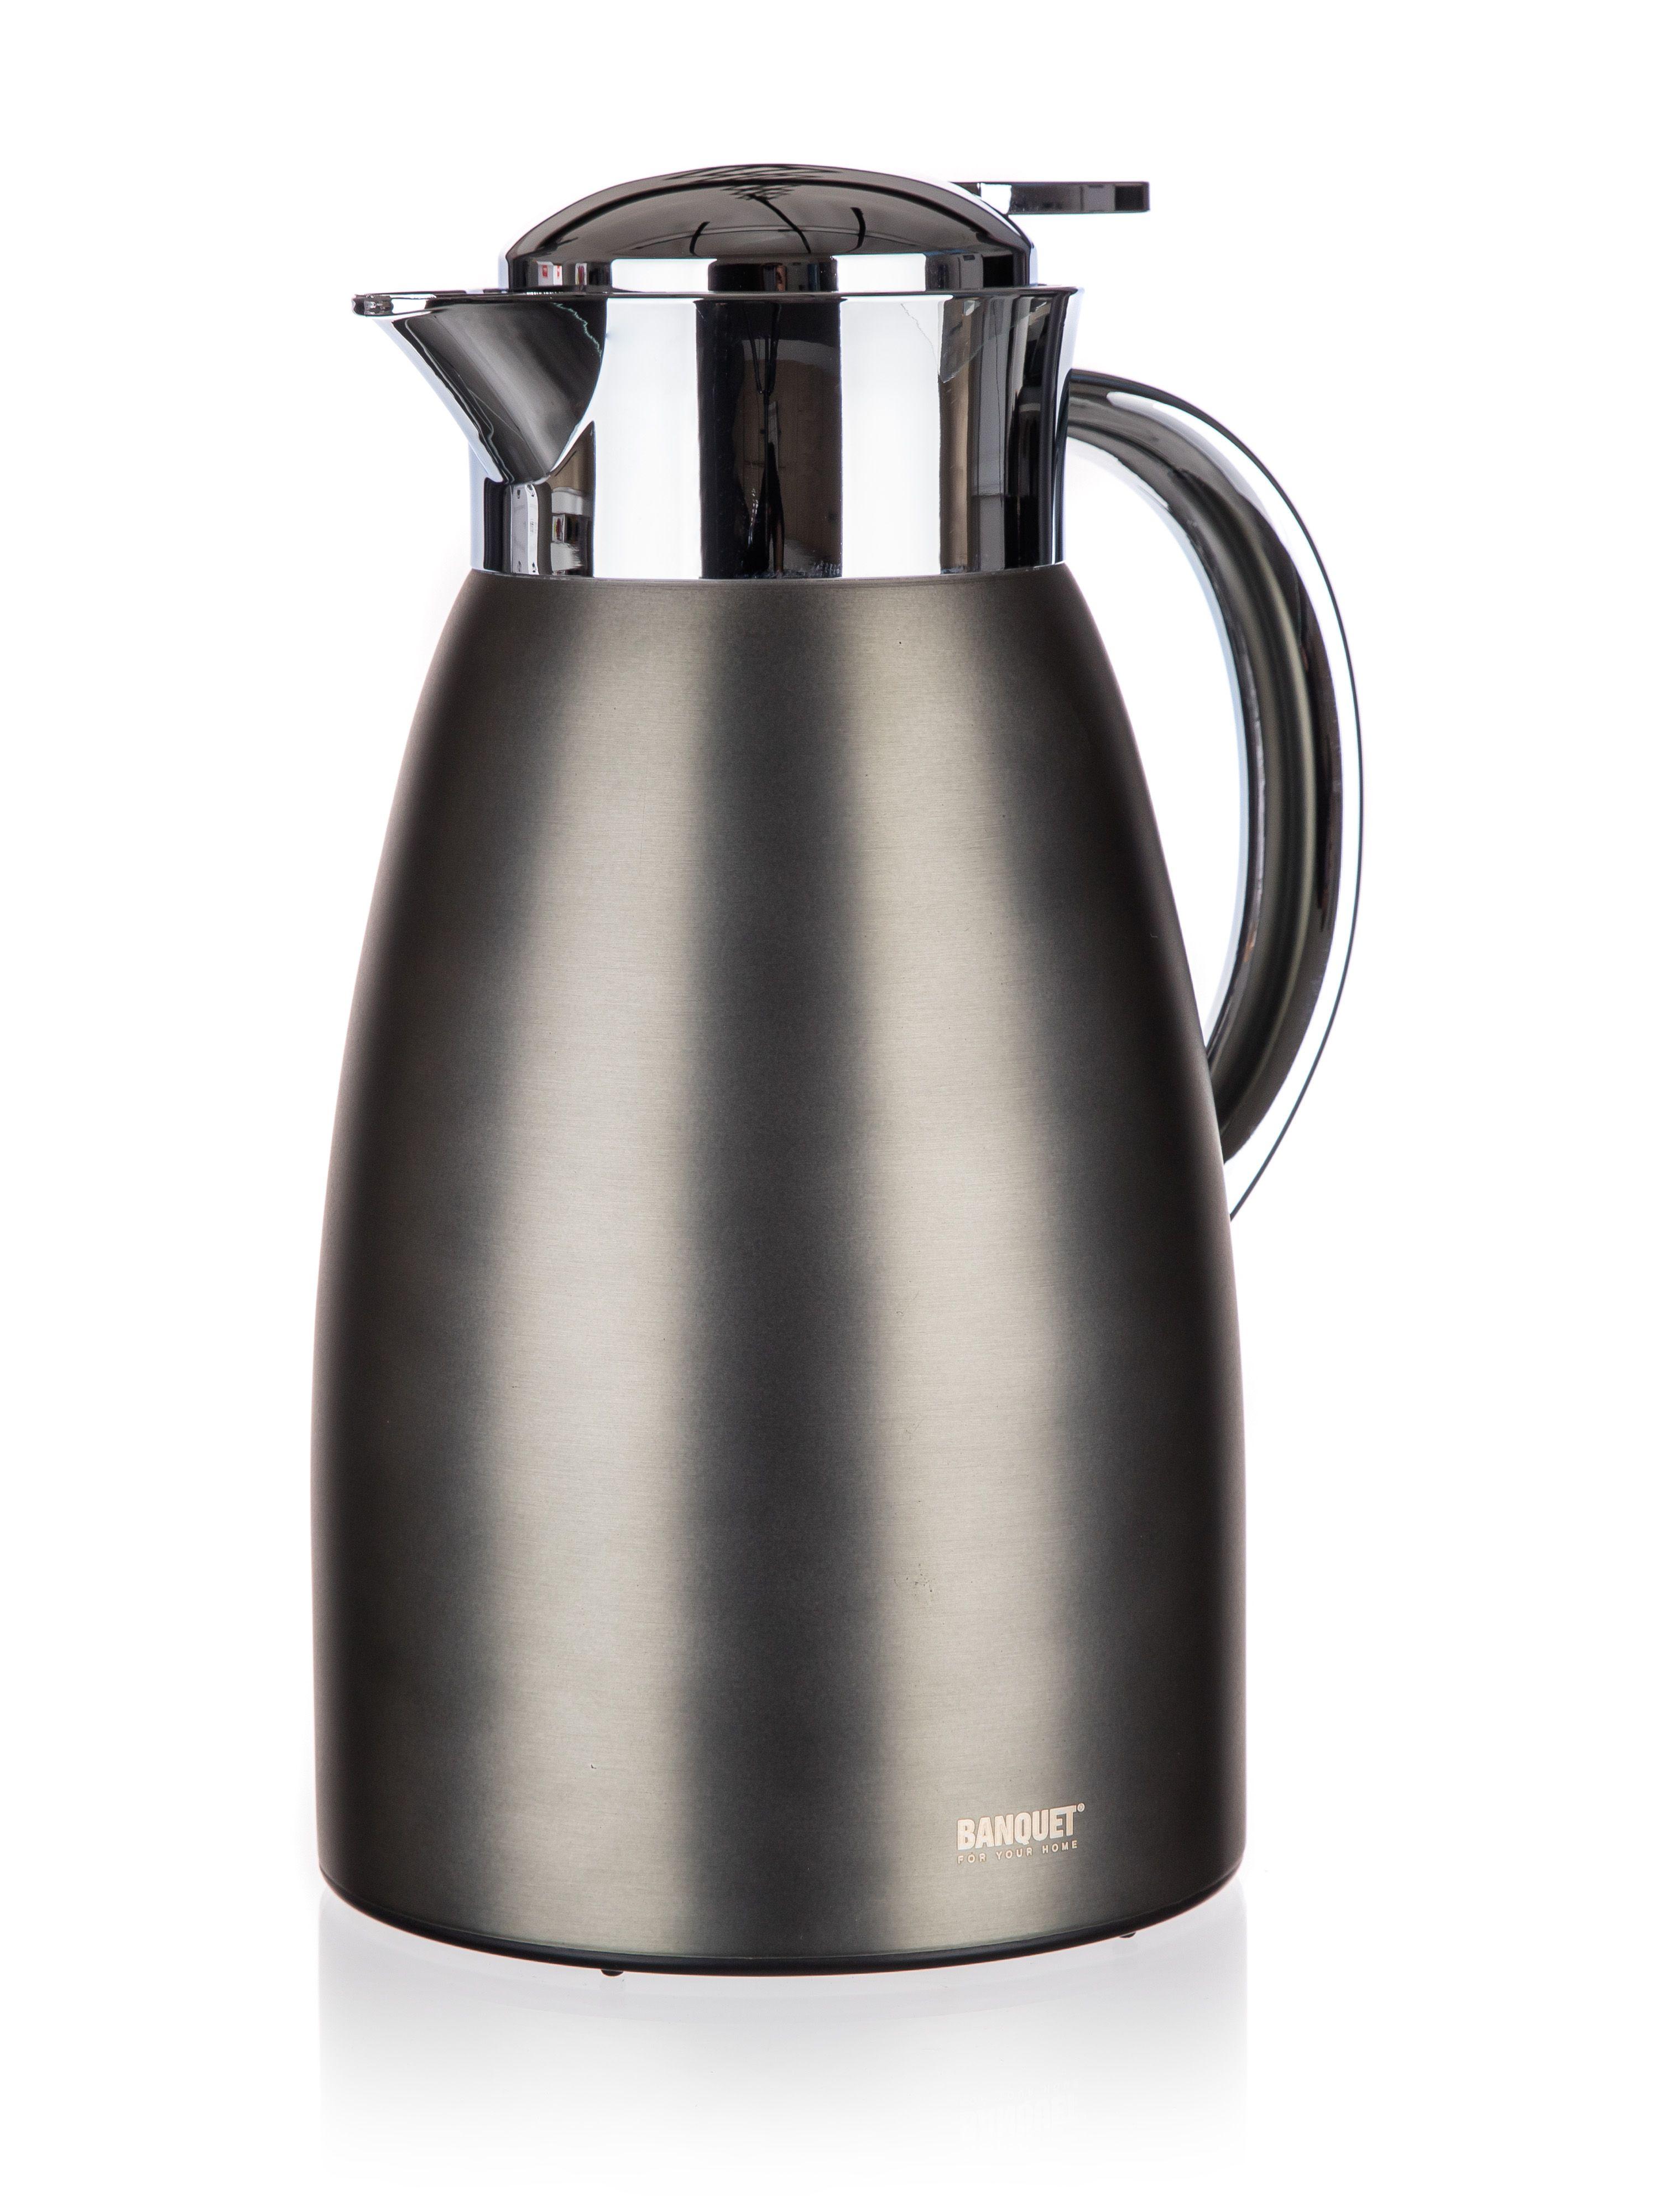 METALLIC Platinum 1,5 l stainless steel double wall kettle